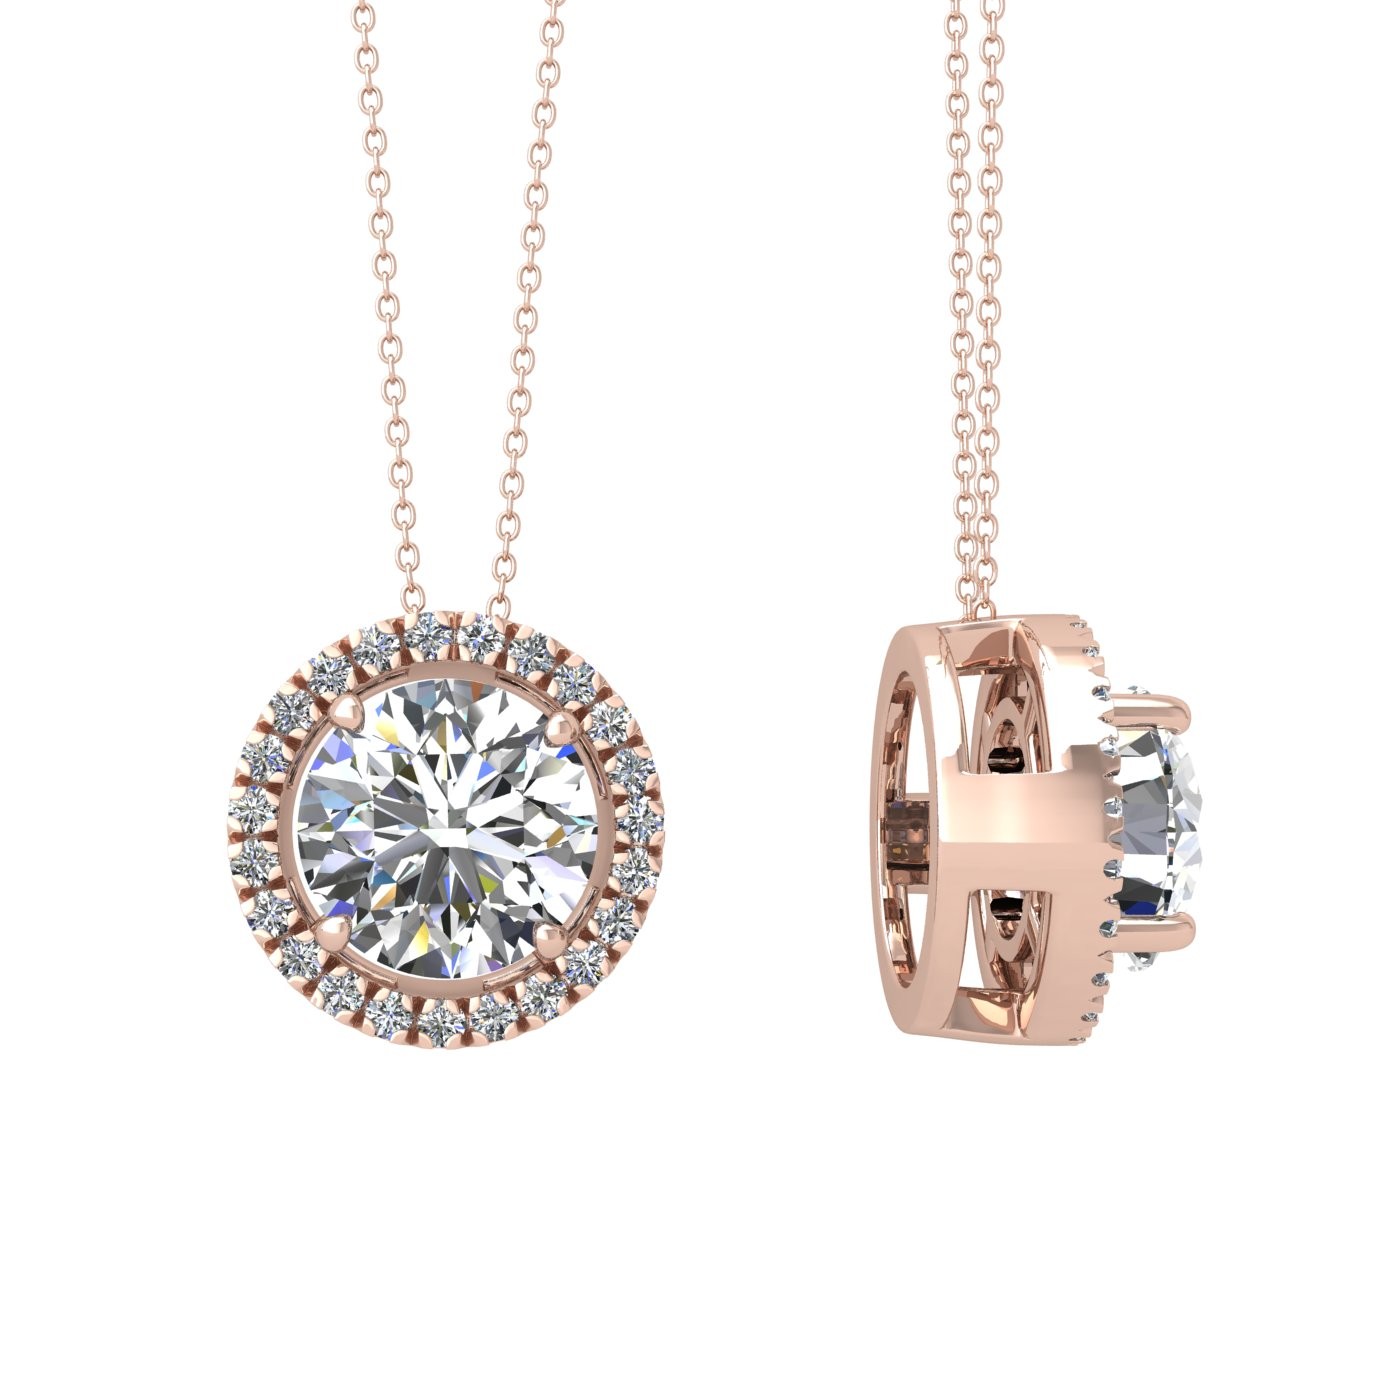 18k rose gold  0,5 ct 4 prong round shape diamond pendant with diamond pavÉ set halo including chain seperate from the pendant Photos & images